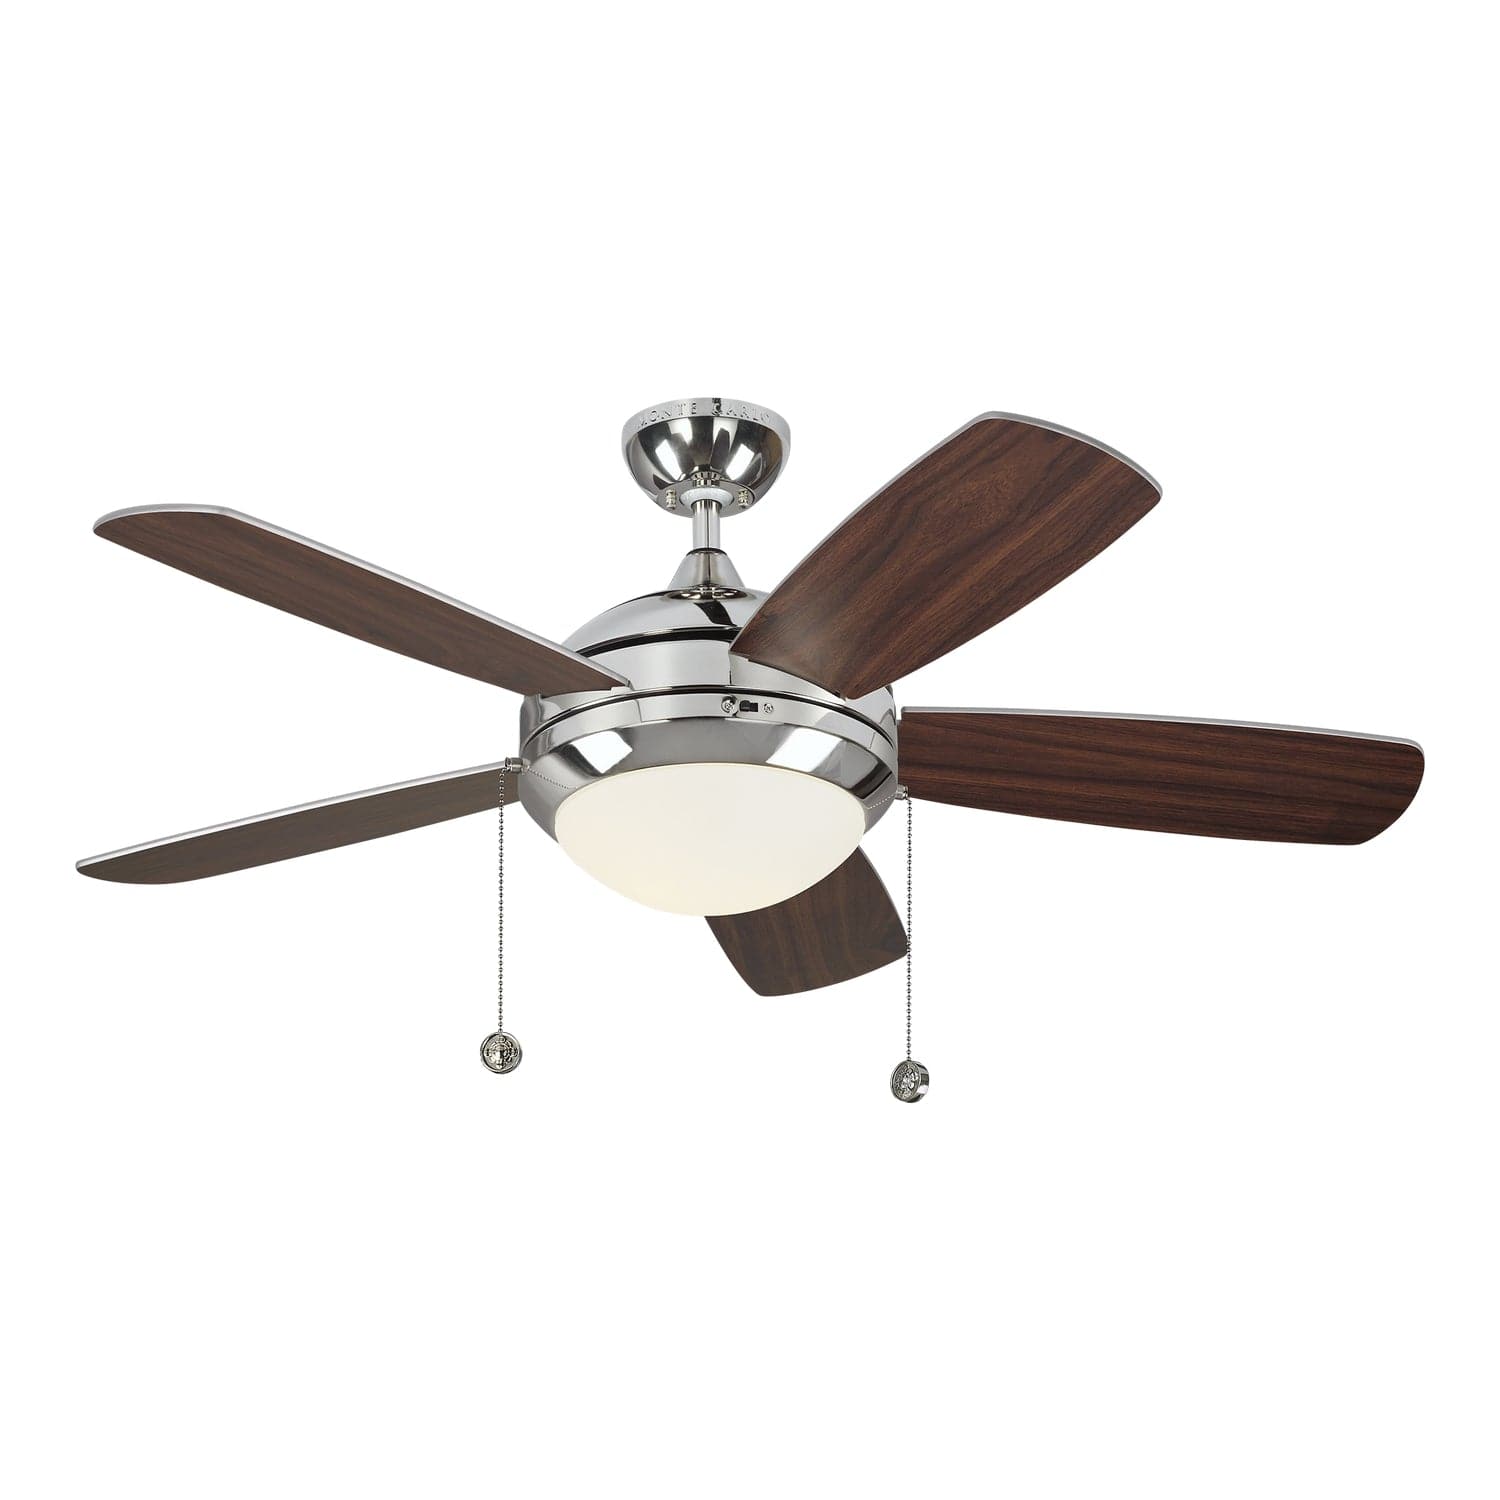 Generation Lighting. - 5DIC44PND-V1 - 44``Ceiling Fan - Discus Classic 44 - Polished Nickel